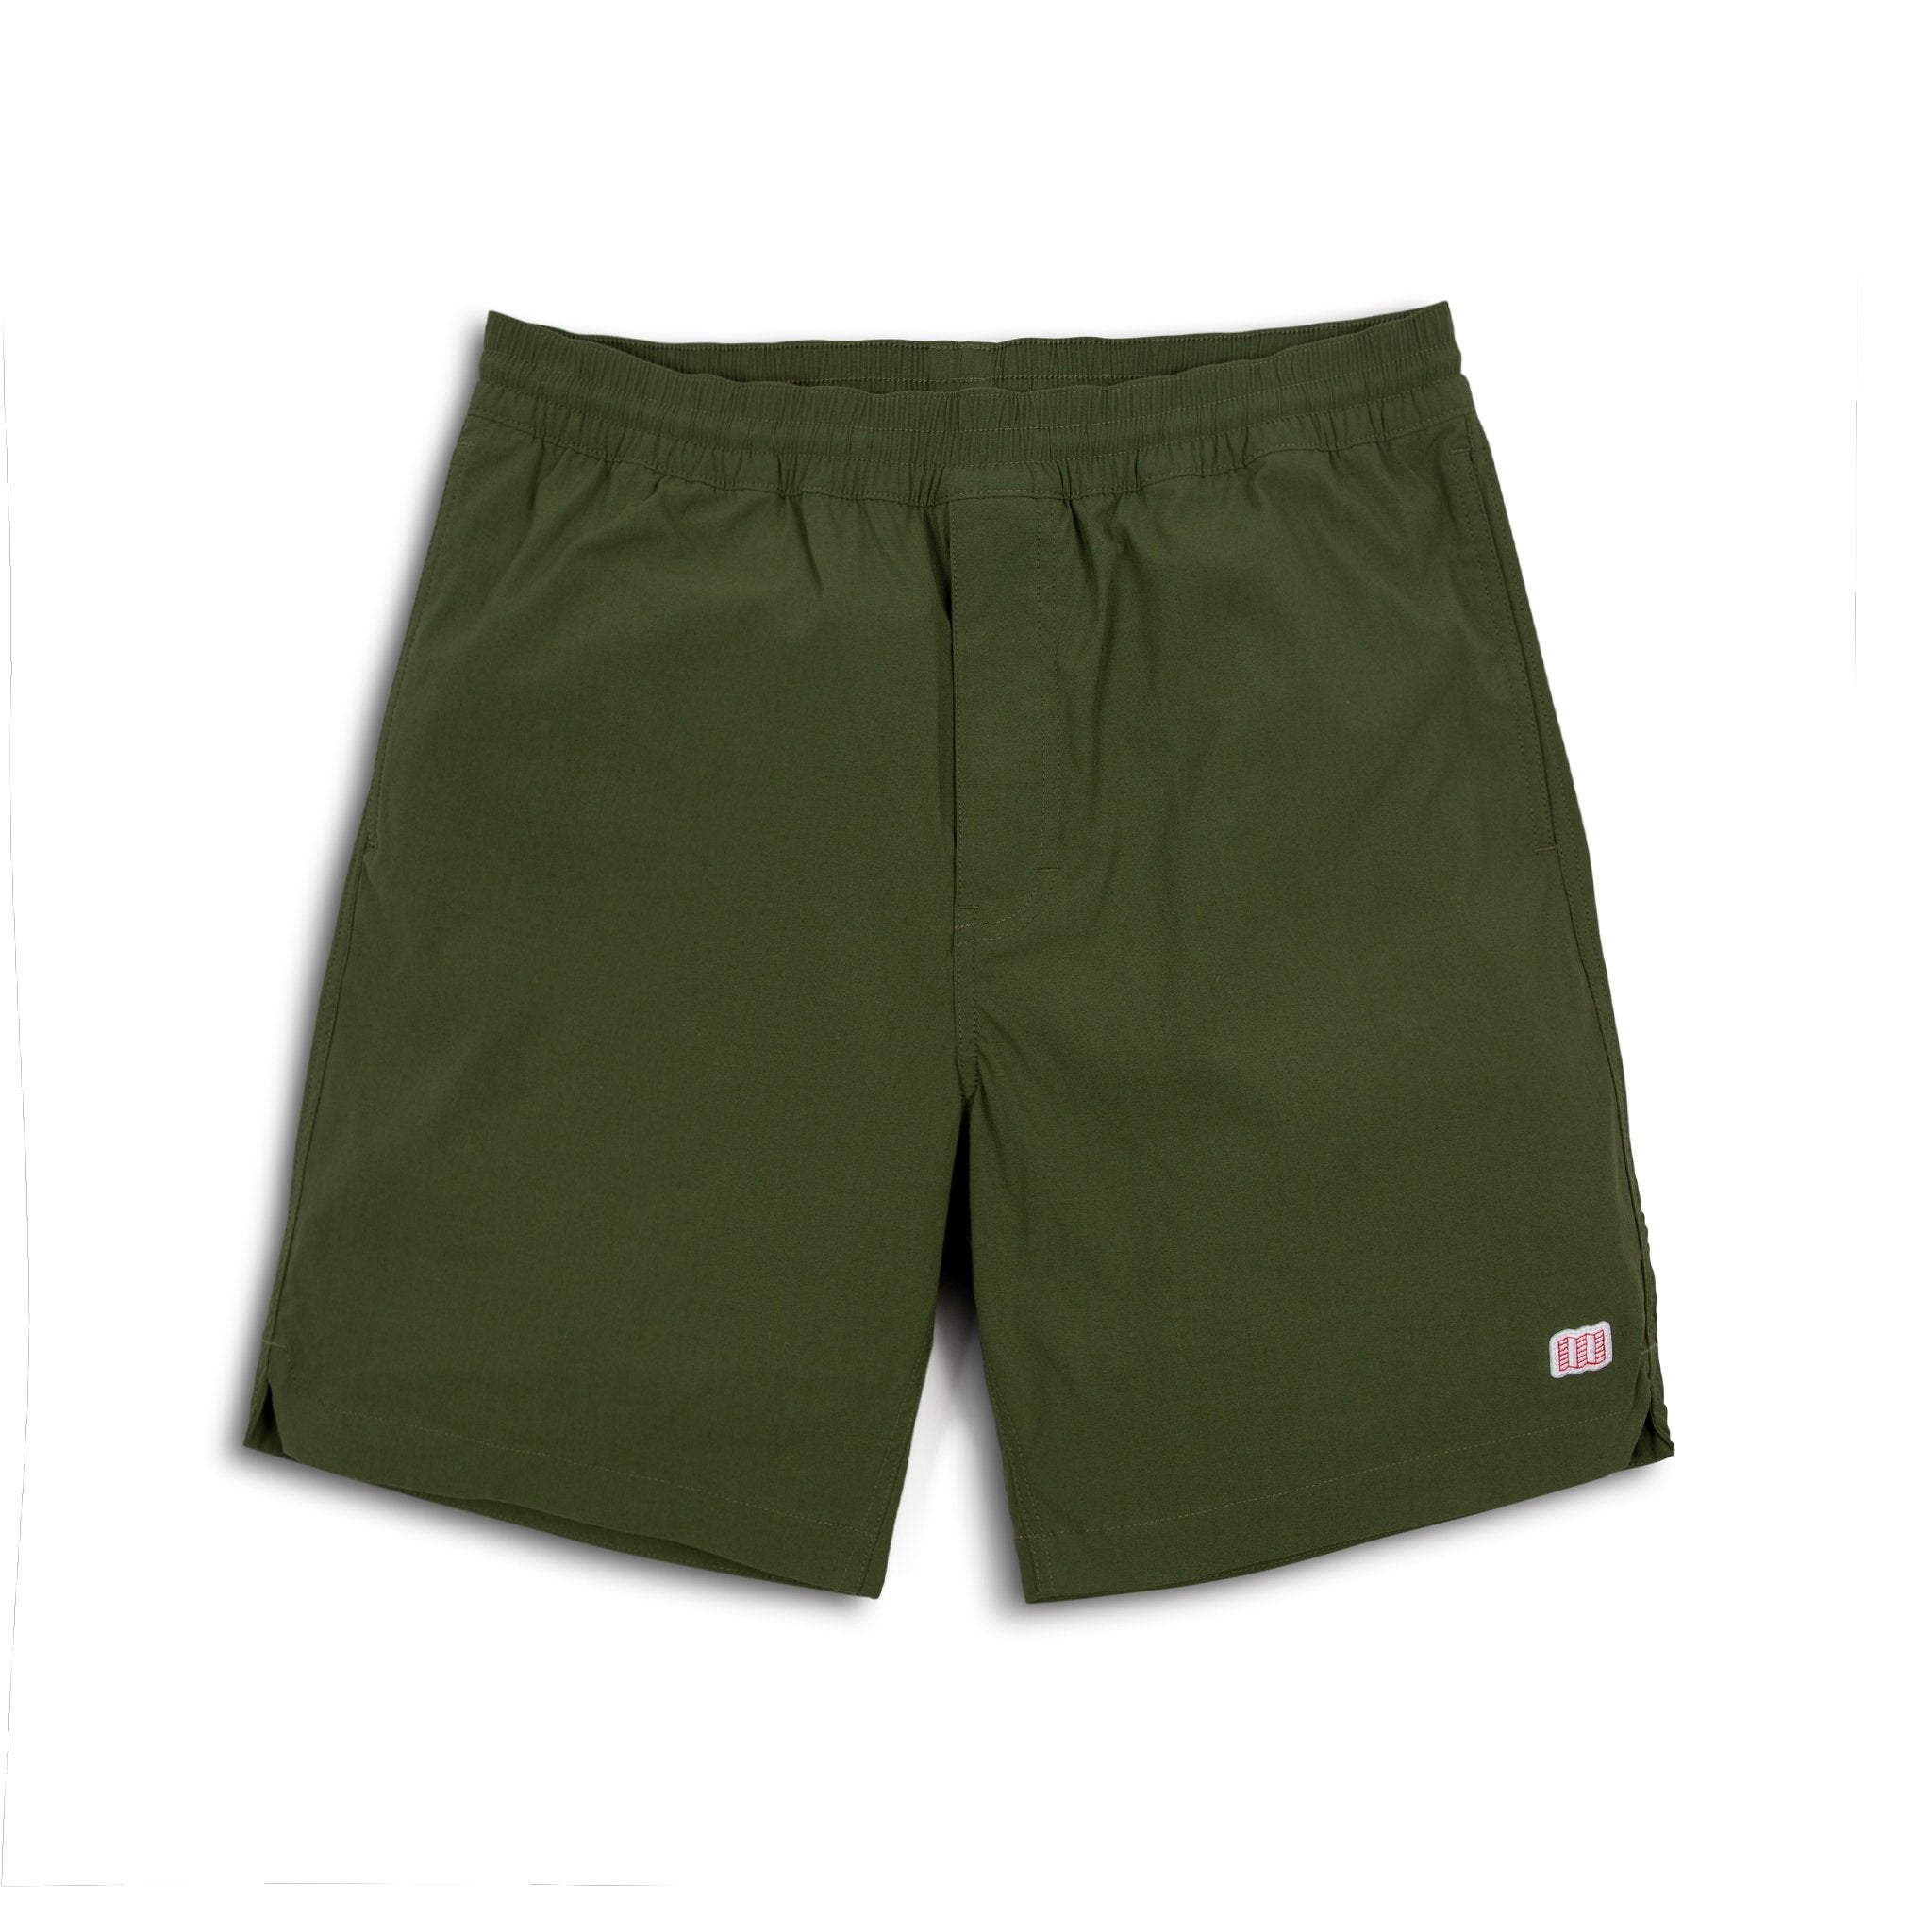 Topo Designs Men's Global lightweight quick dry travel Shorts in Olive green.